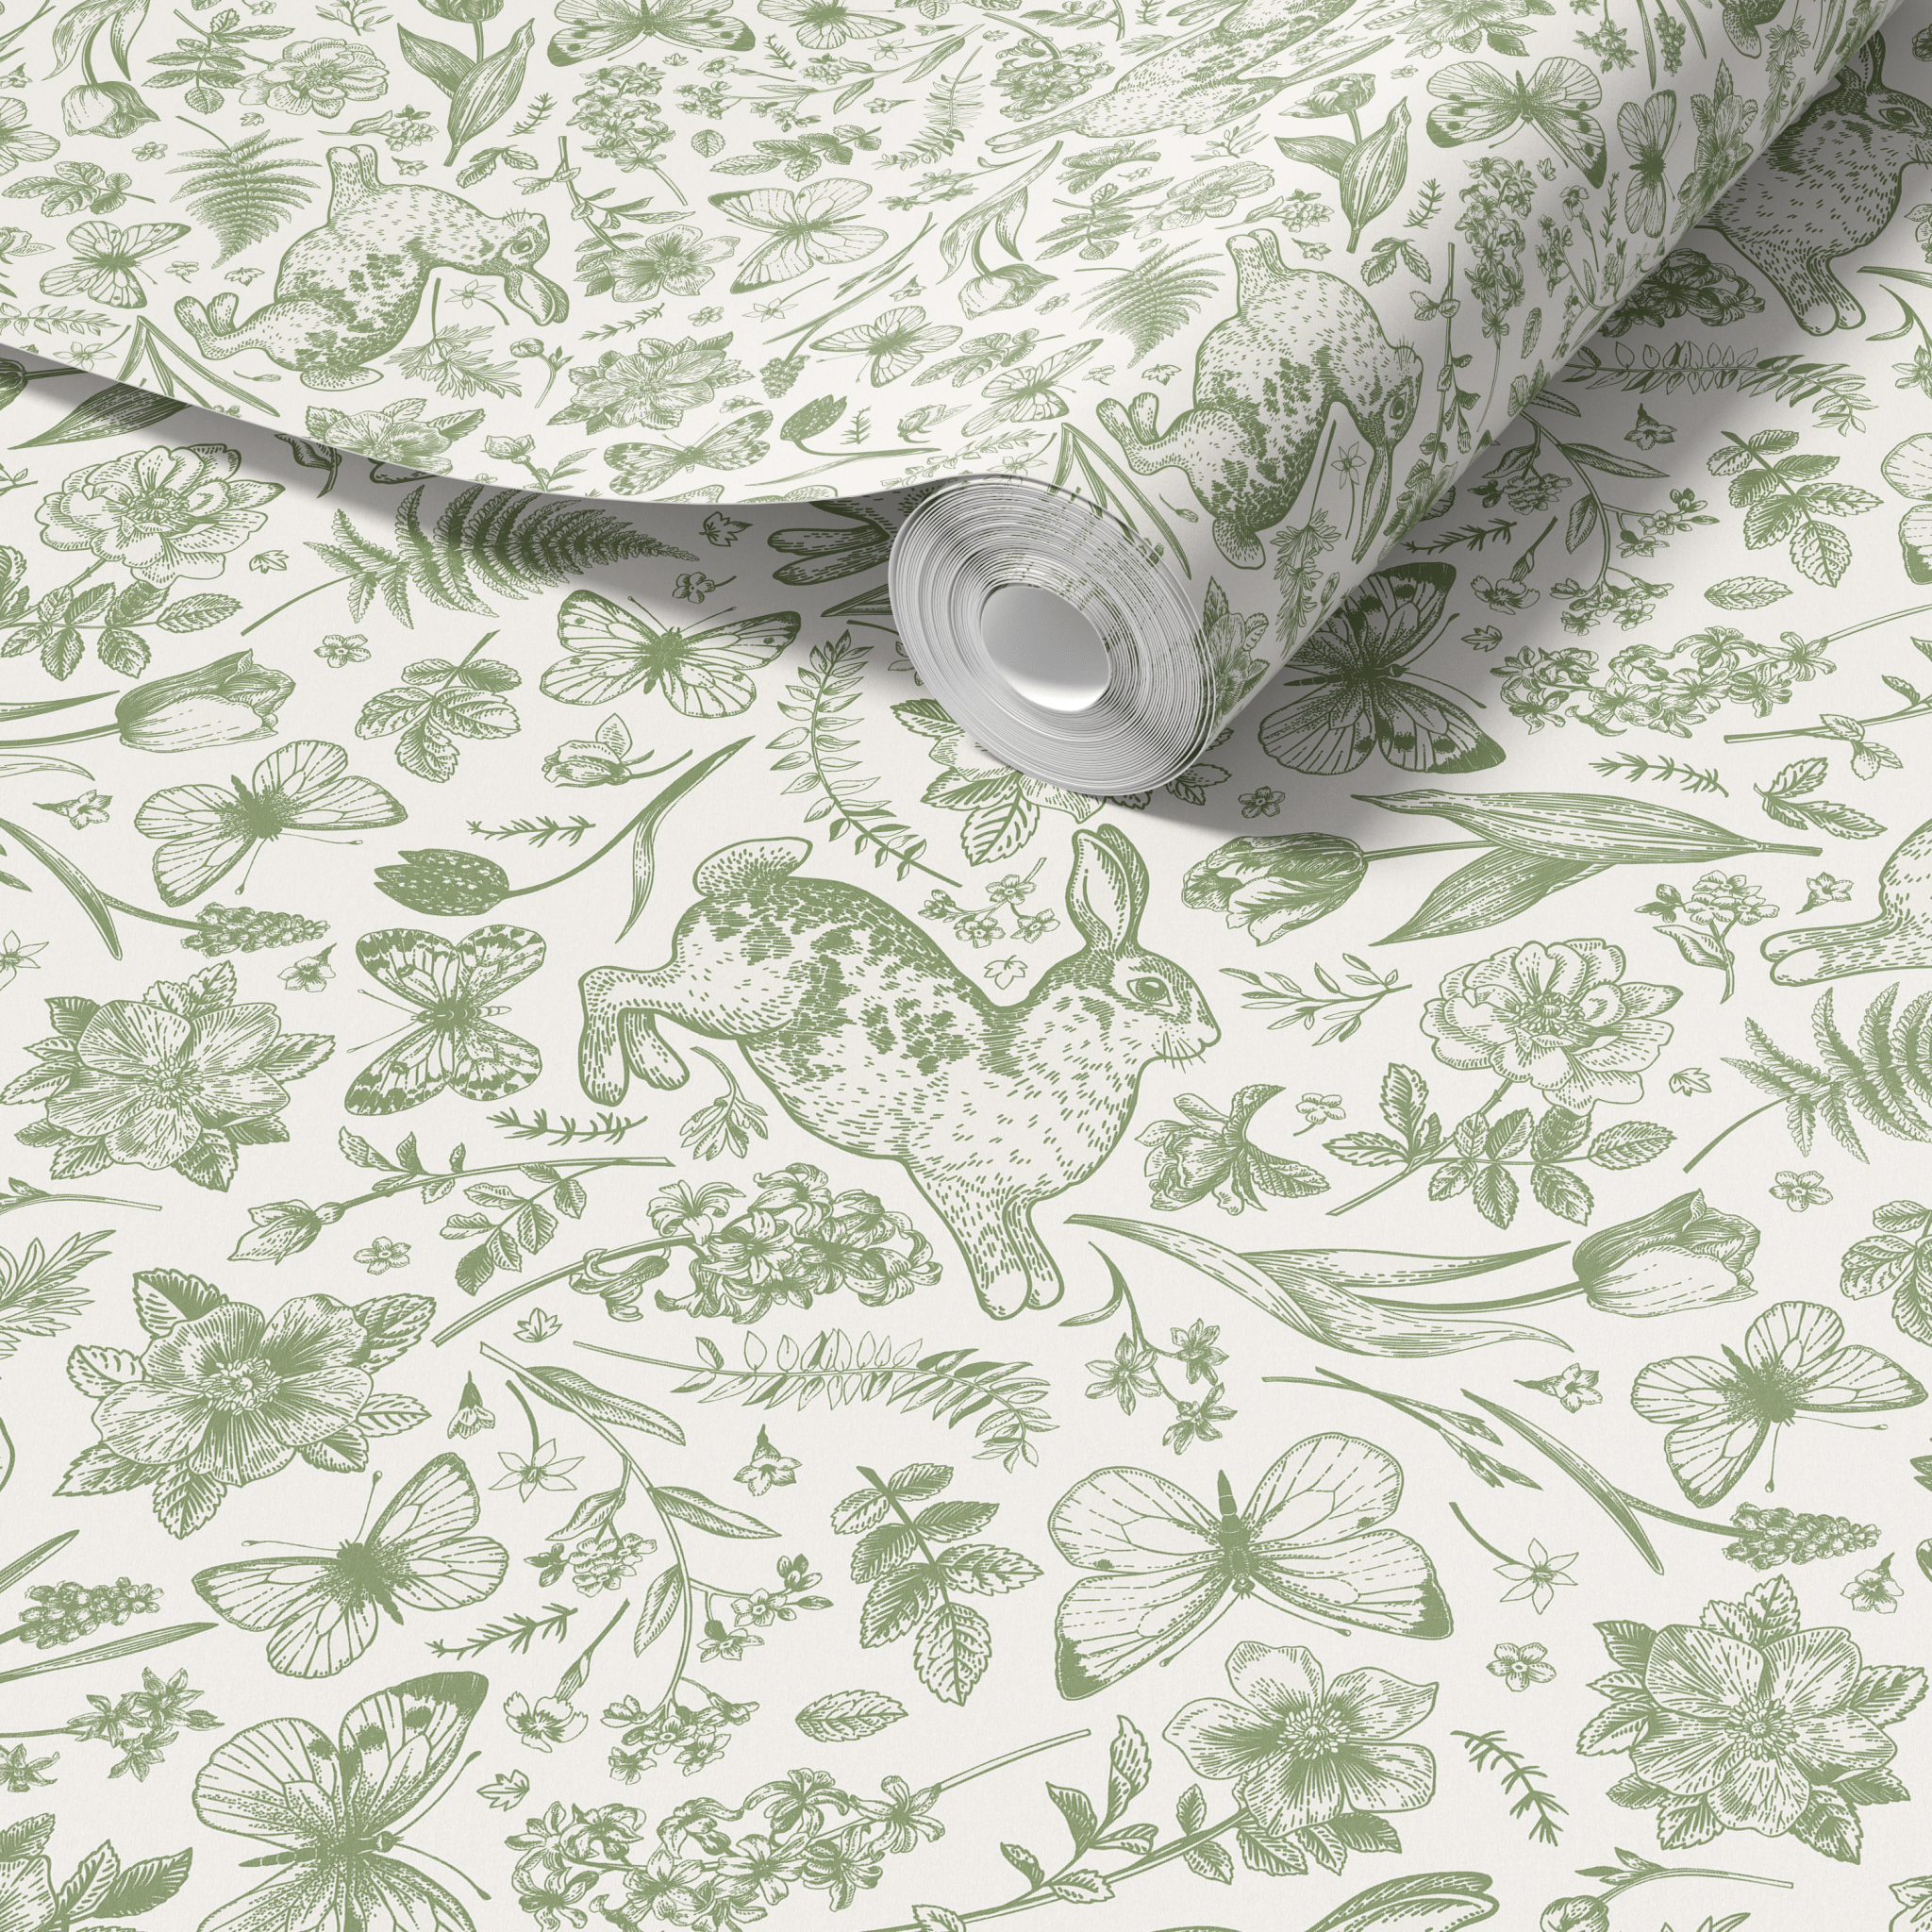 Designer wallpaper featuring a nature-inspired print with rabbits and botanicals, ideal for a fresh and vibrant home interior upgrade